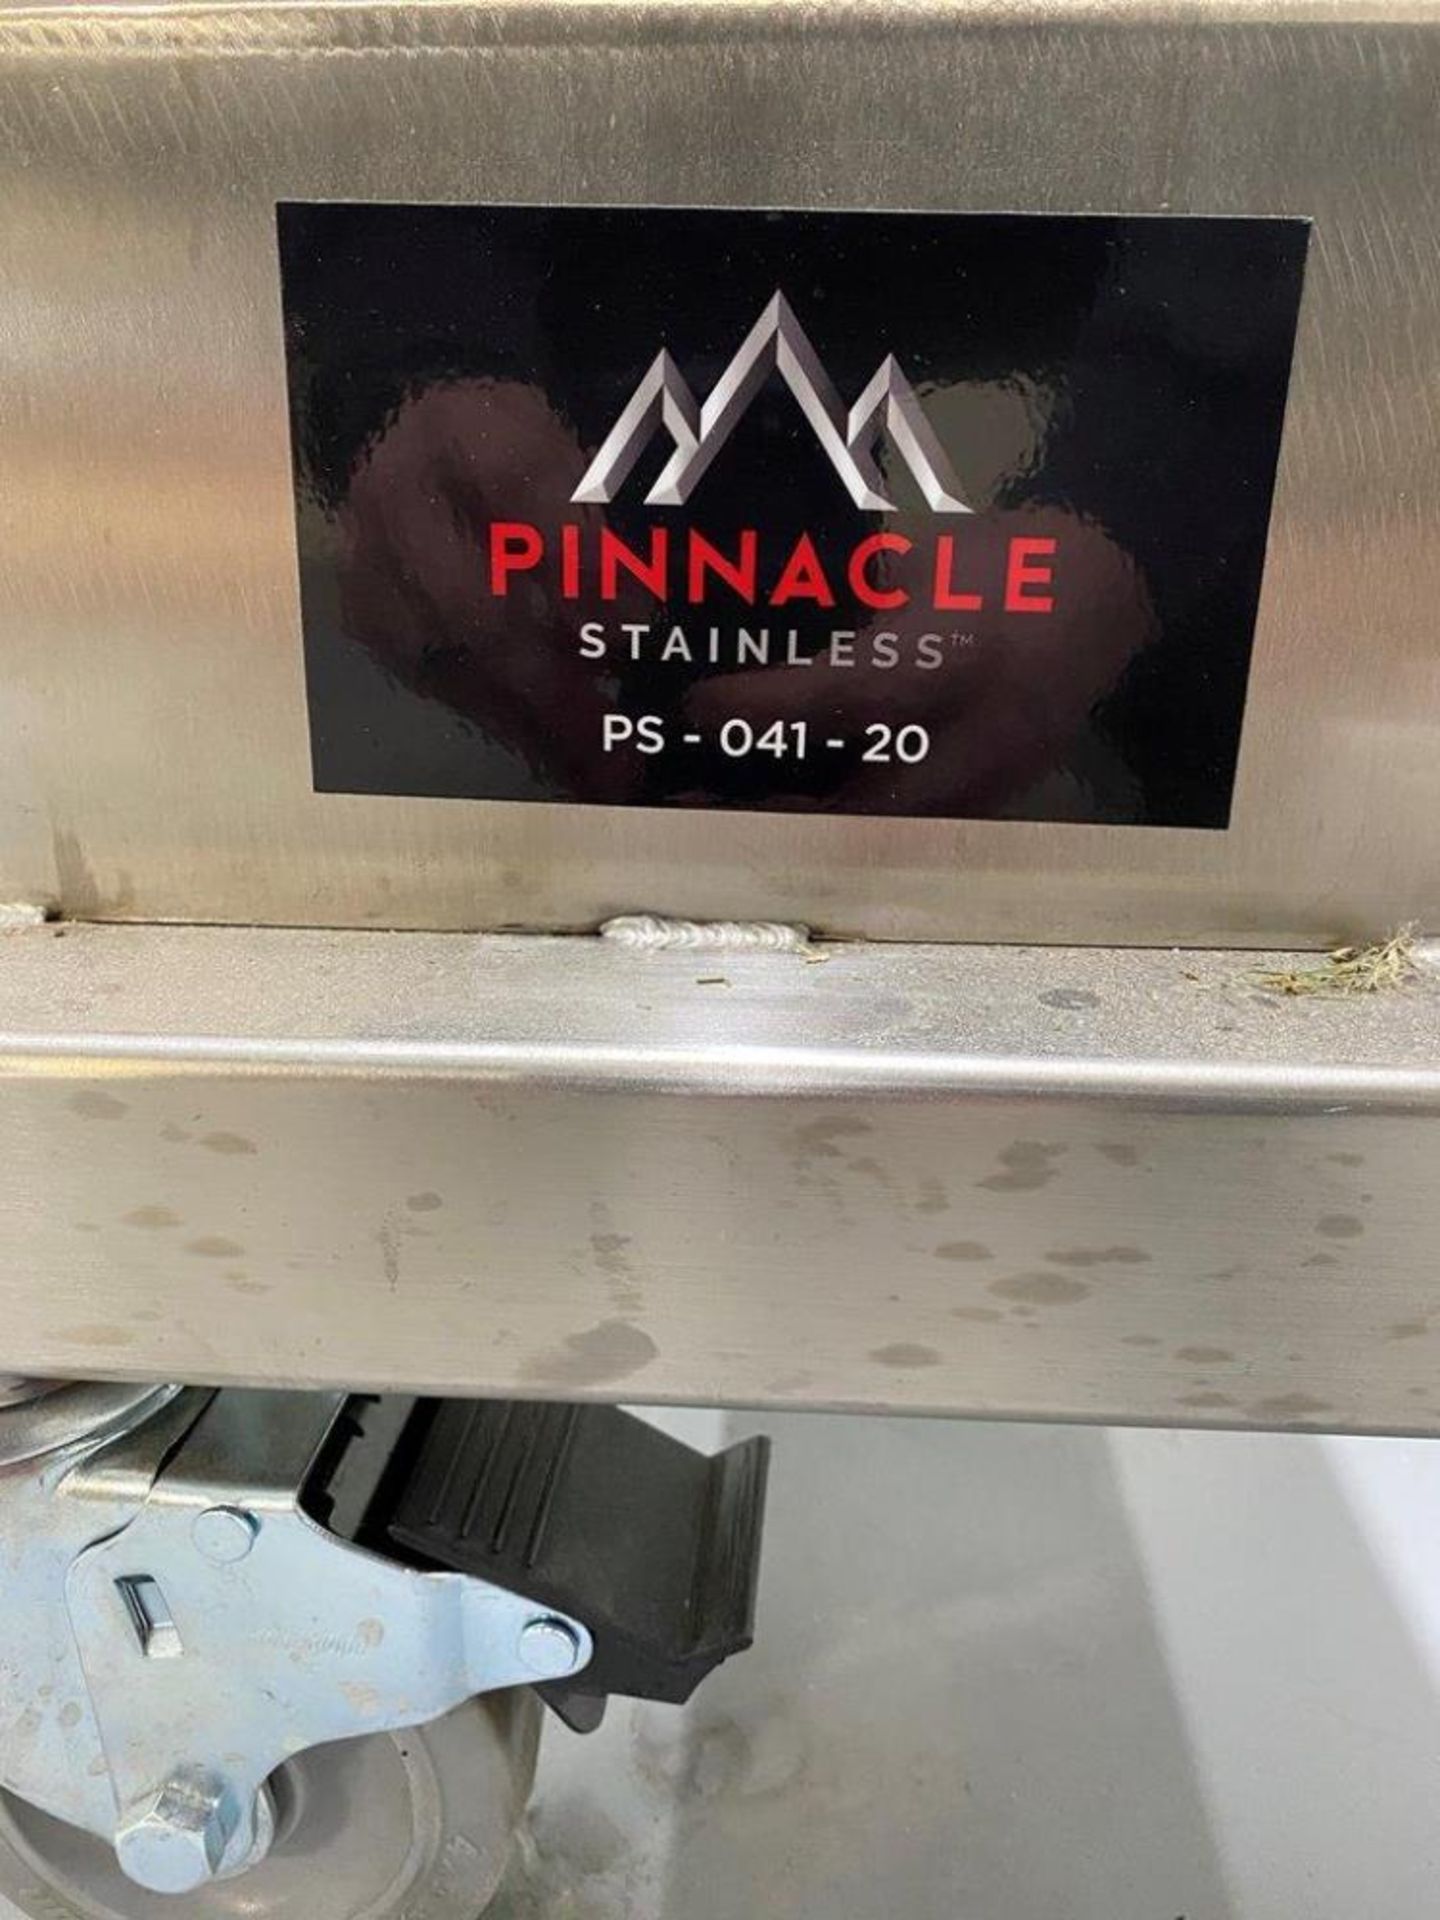 Pinnacle Stainless Alcohol Extraction Skid - Image 7 of 7